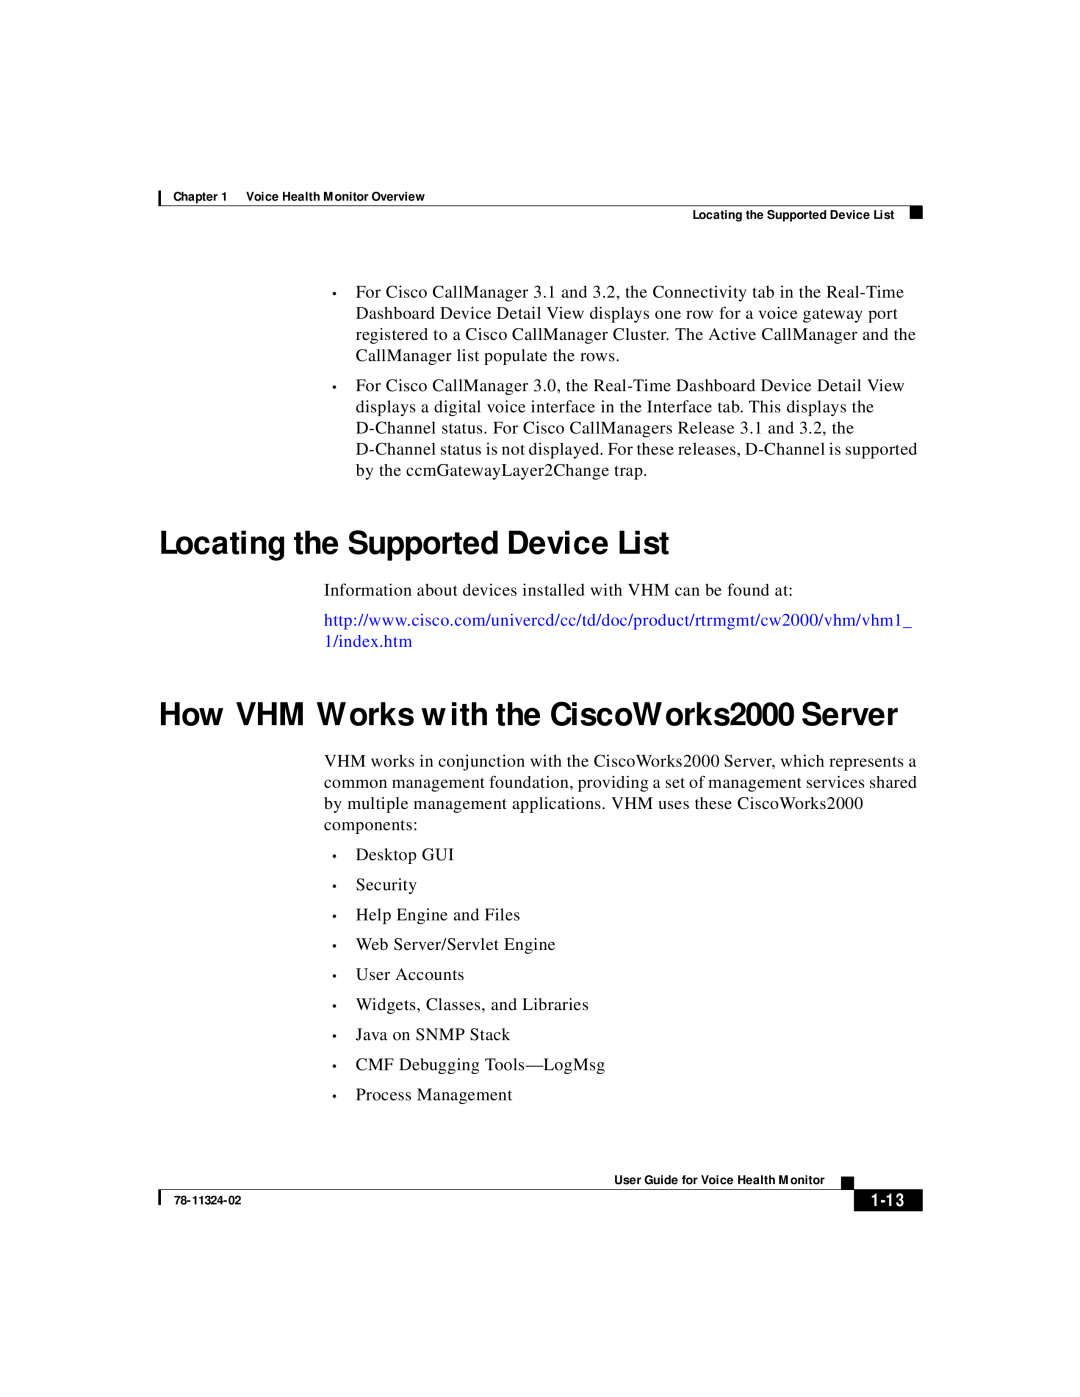 Cisco Systems 78-11324-02 manual Locating the Supported Device List, 1-13, How VHM Works with the CiscoWorks2000 Server 